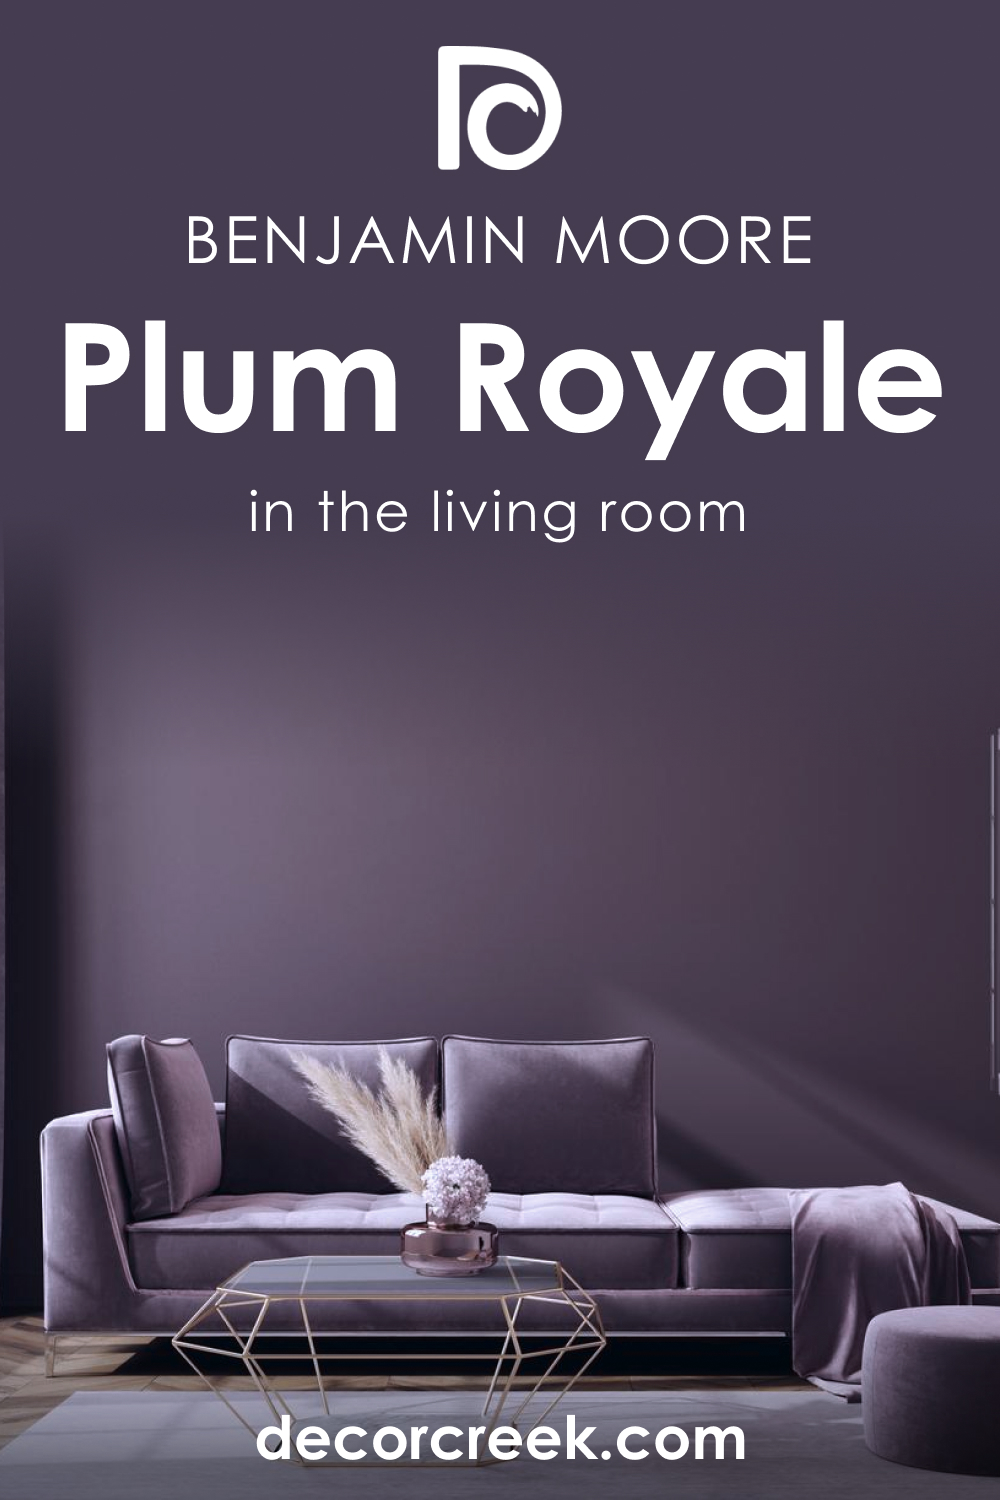 How to Use Plum Royale 2070-20 in the Living Room?